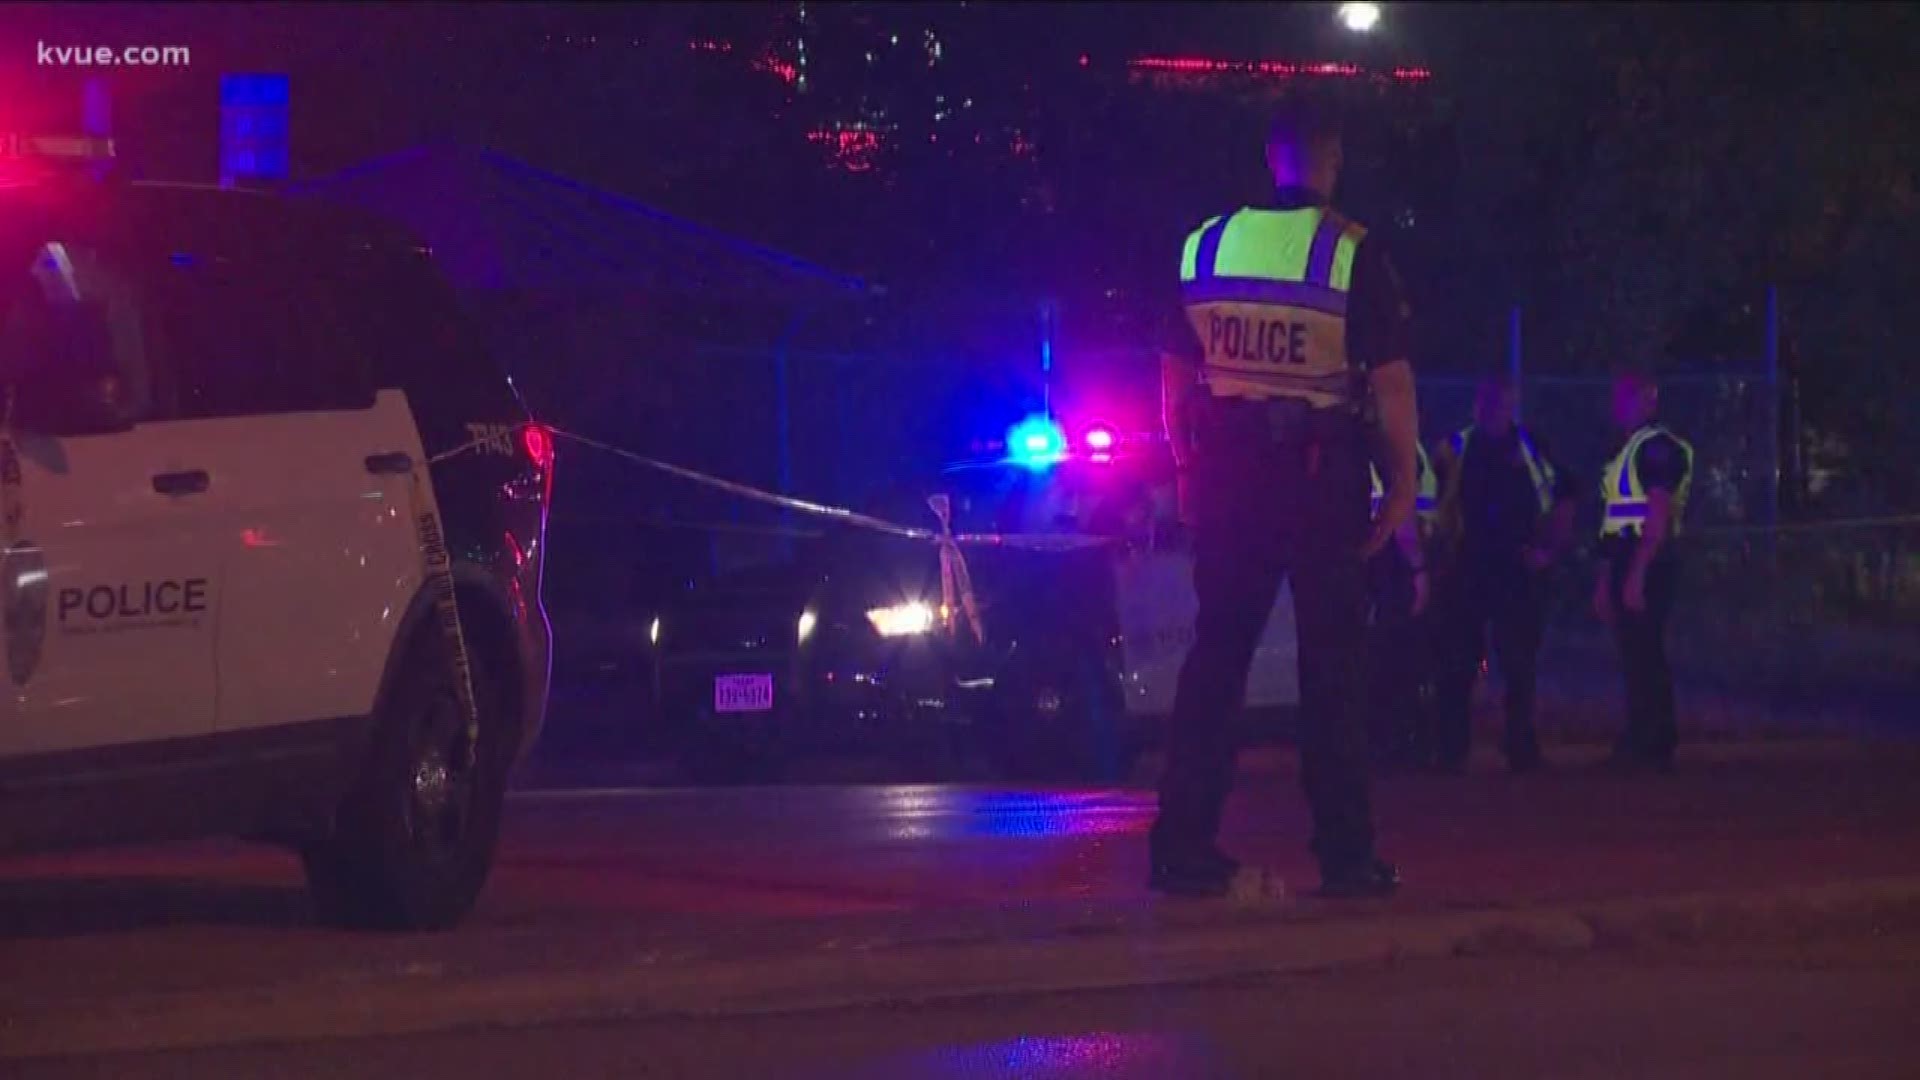 Another person was hit and killed by a car while trying to cross a road in North Austin.